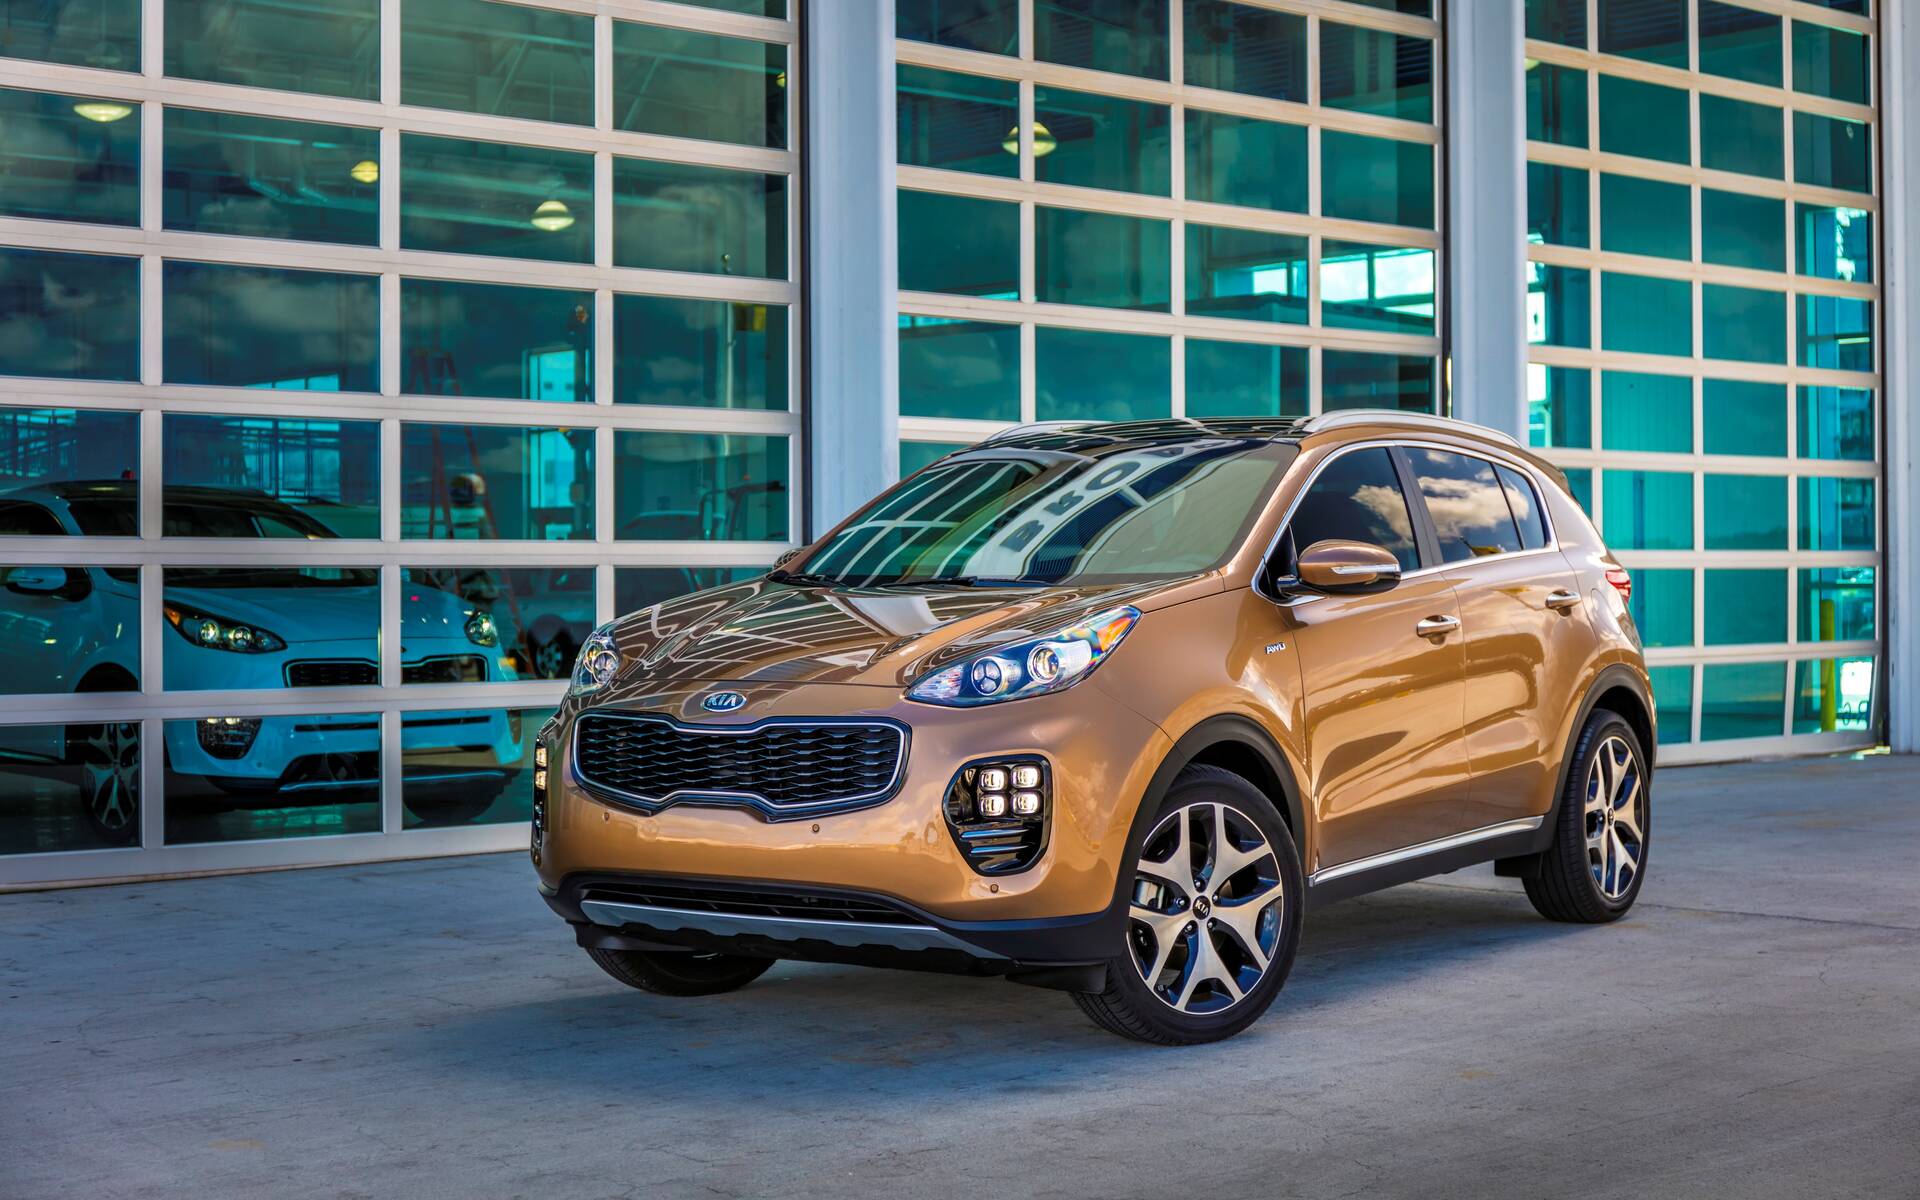 2017-2022 Kia Sportage: What You Should Know Before You Buy - The Car Guide